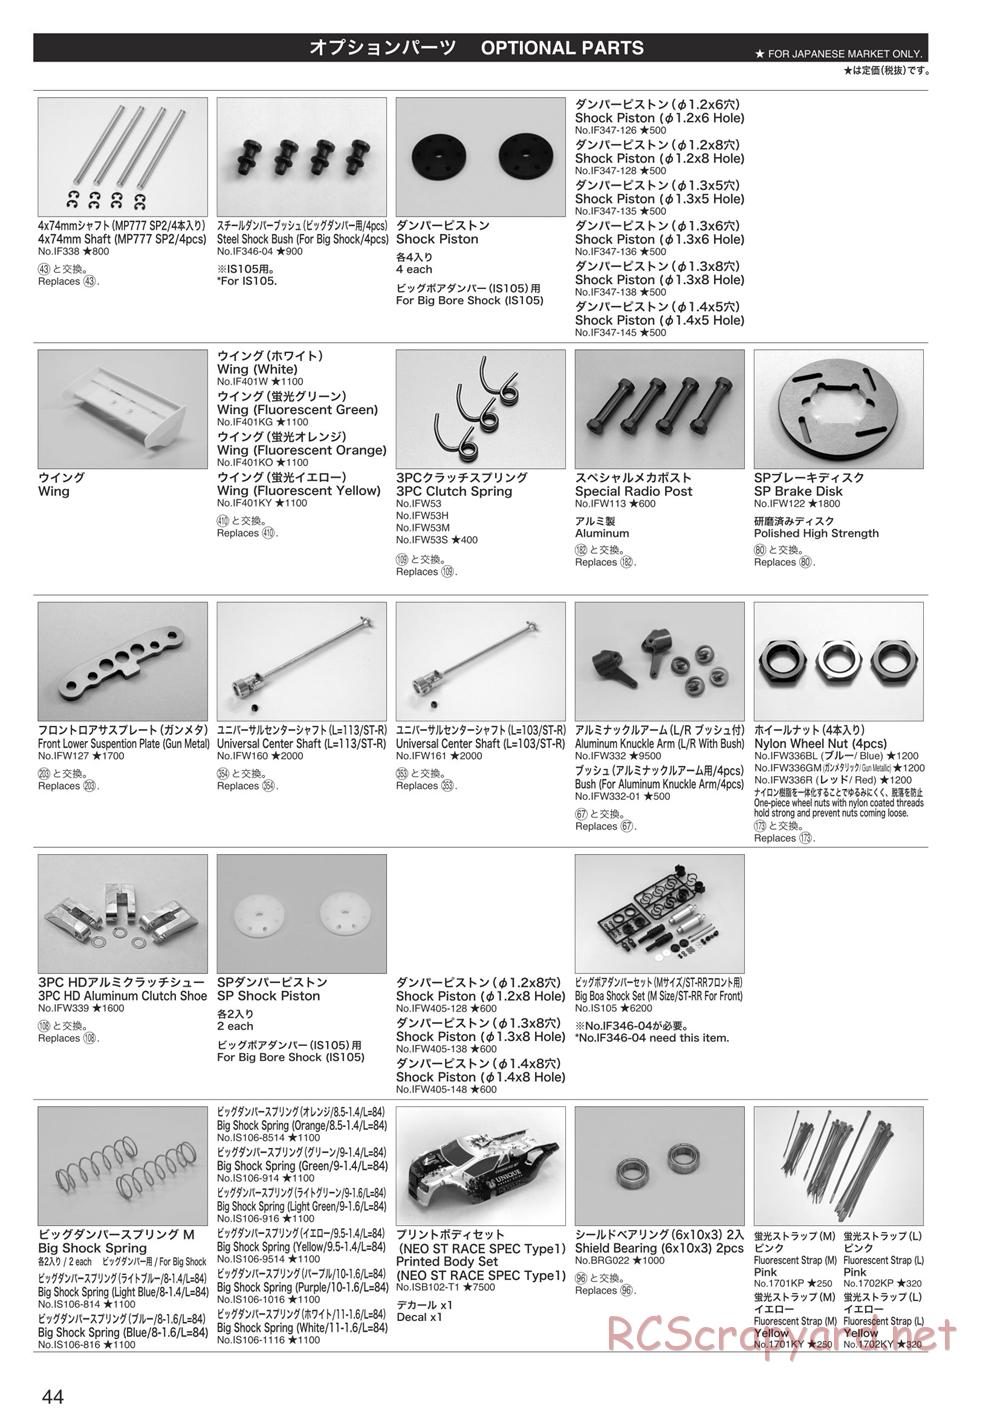 Kyosho - Inferno NEO ST Race Spec - Parts List - Page 3